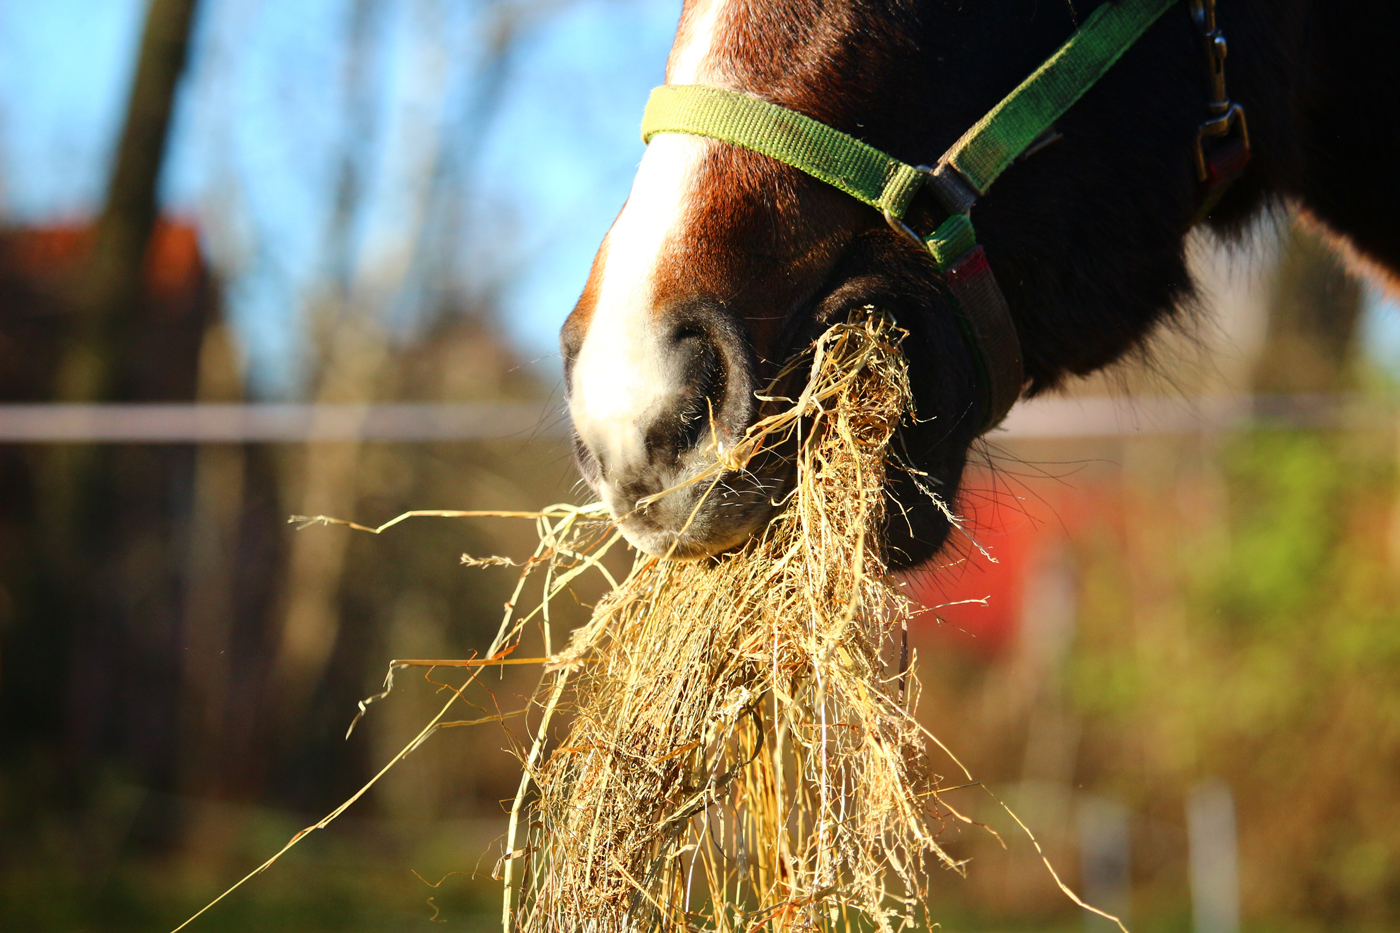 A horse chewing hay on a sunny day